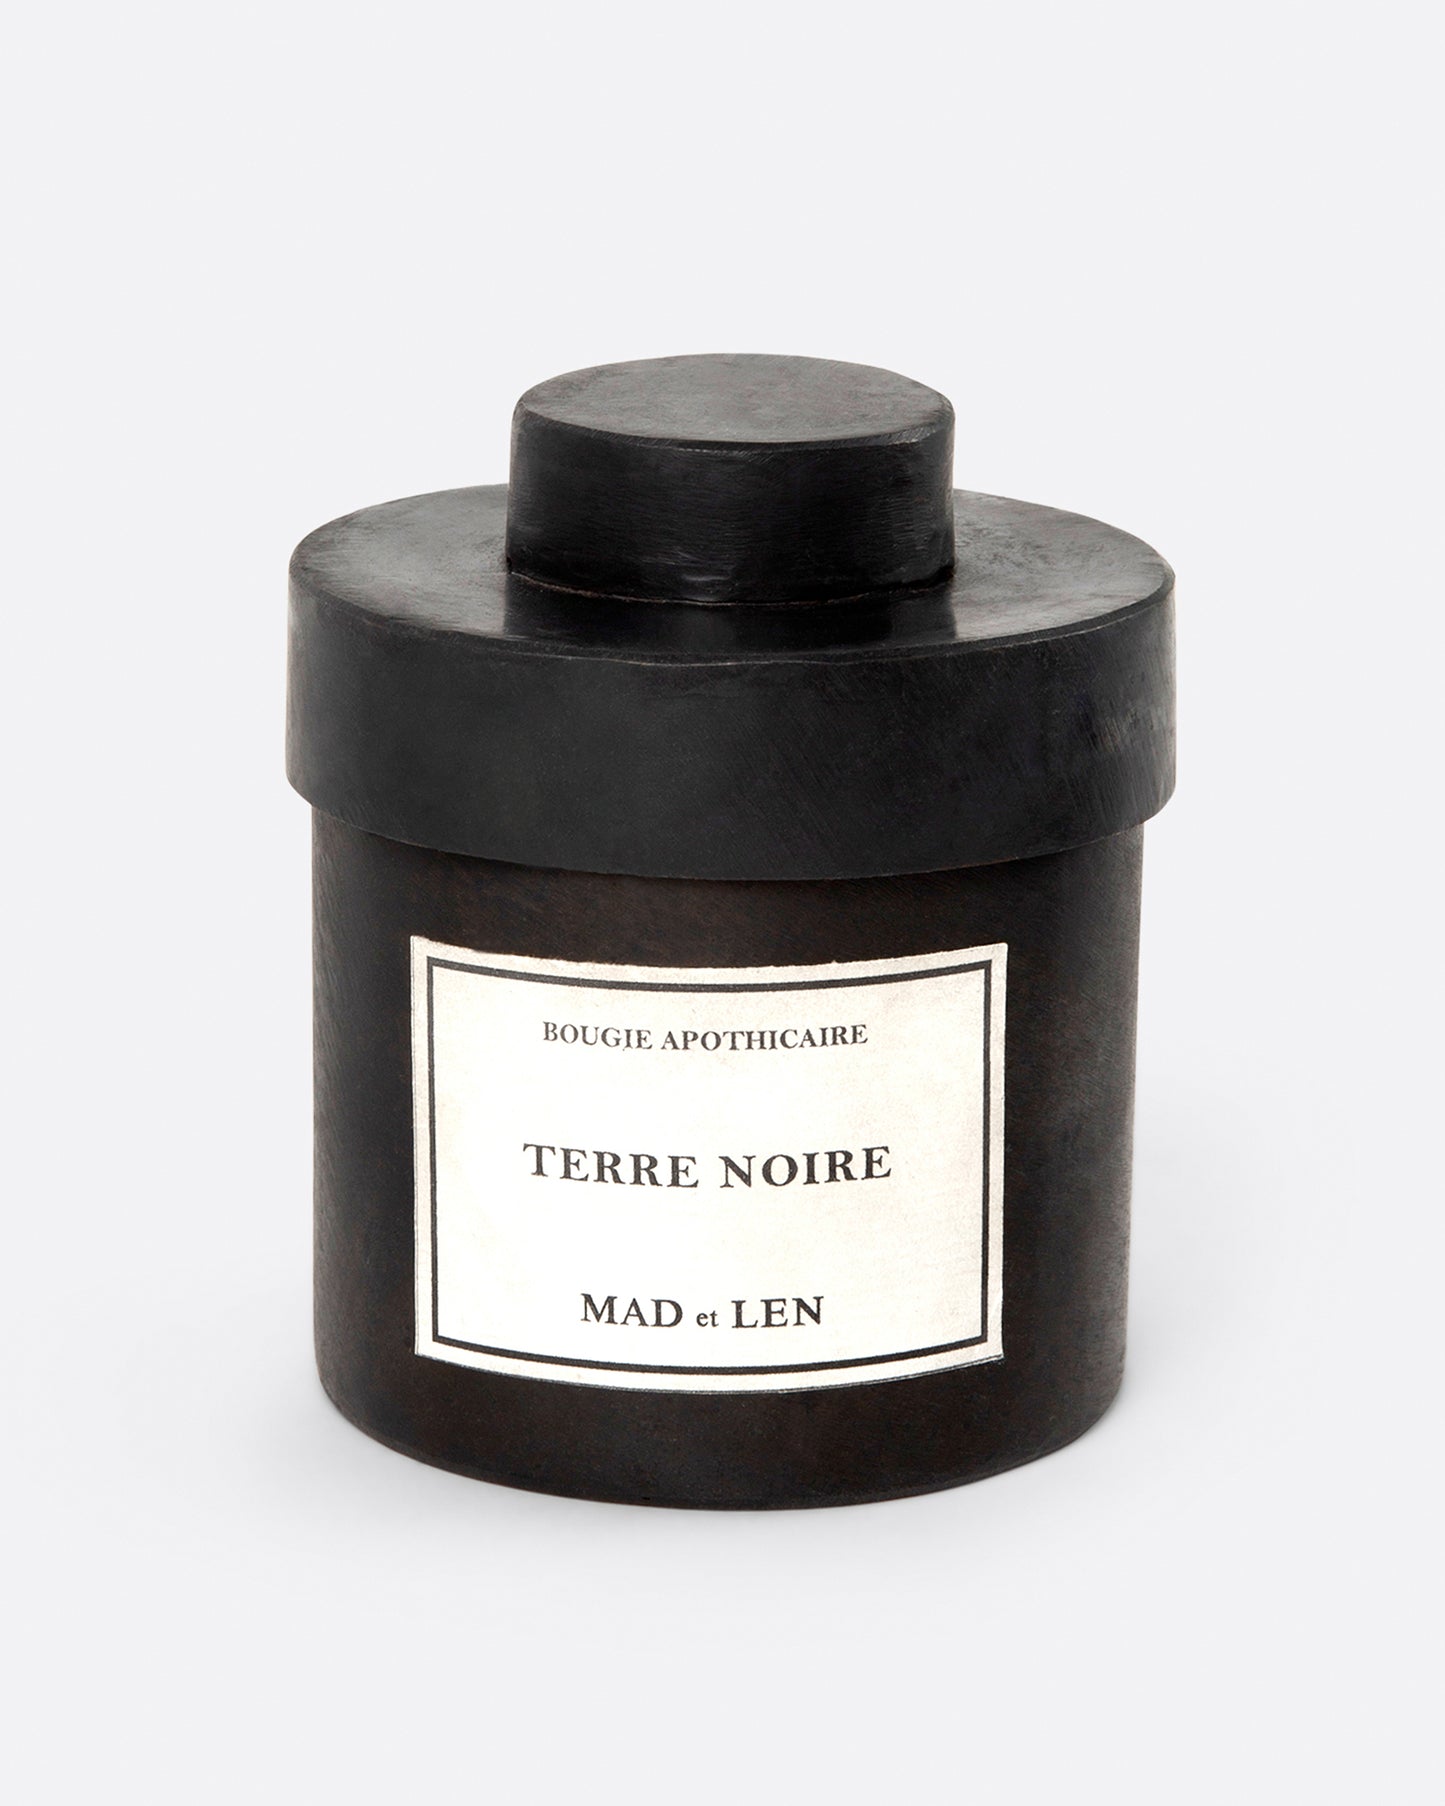 Mad et Len Terre Noire candle shown from the front.